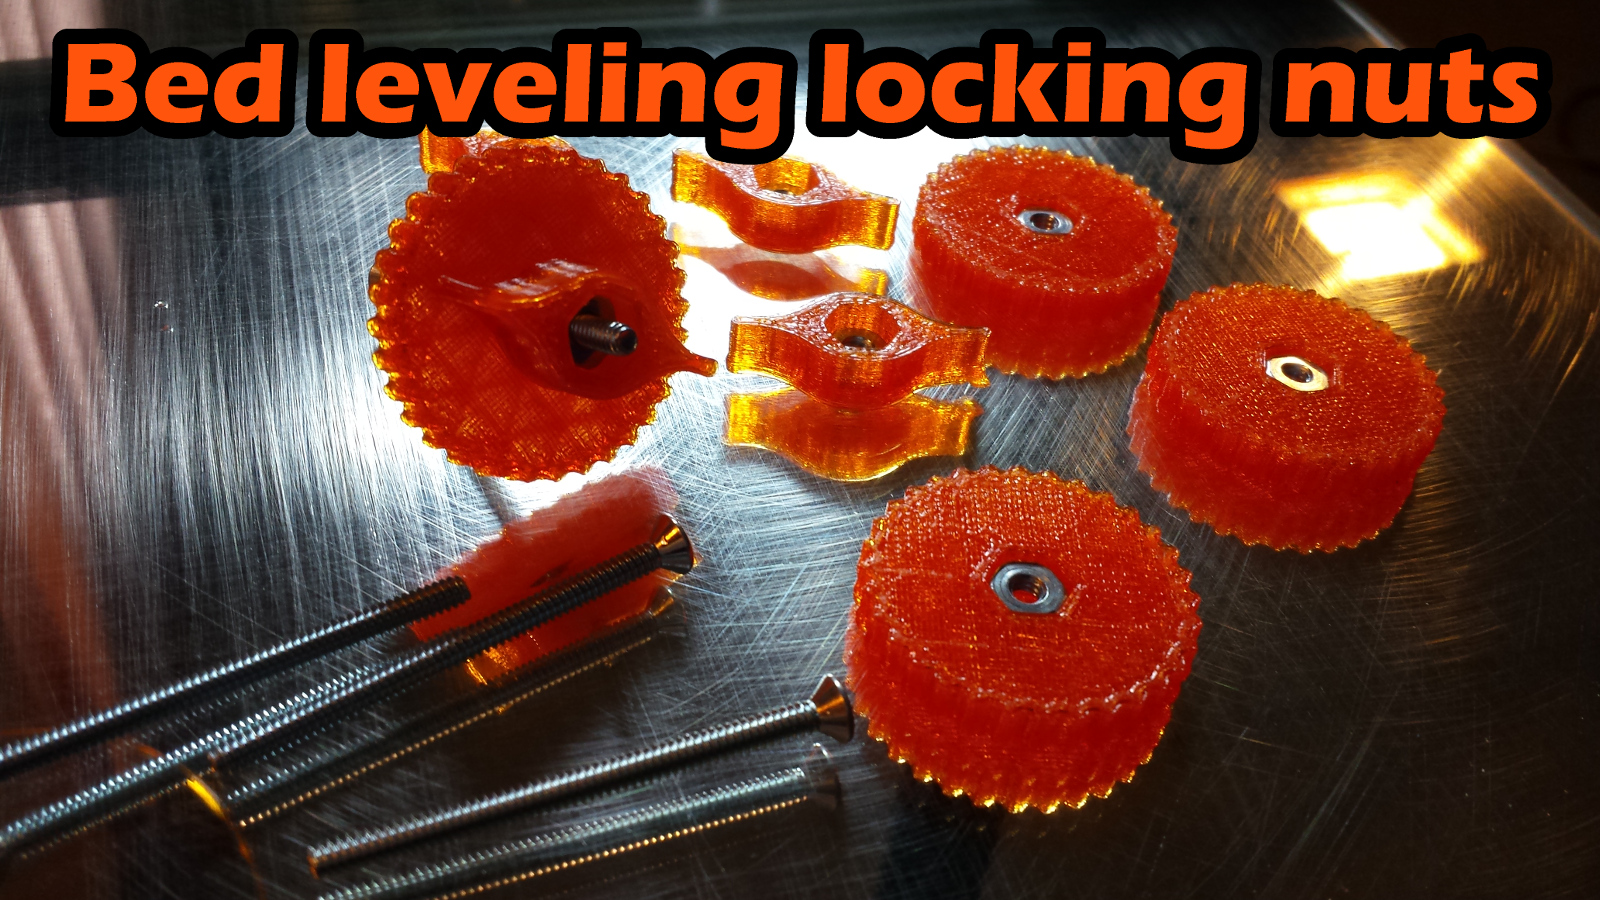 Bed leveling locking nuts